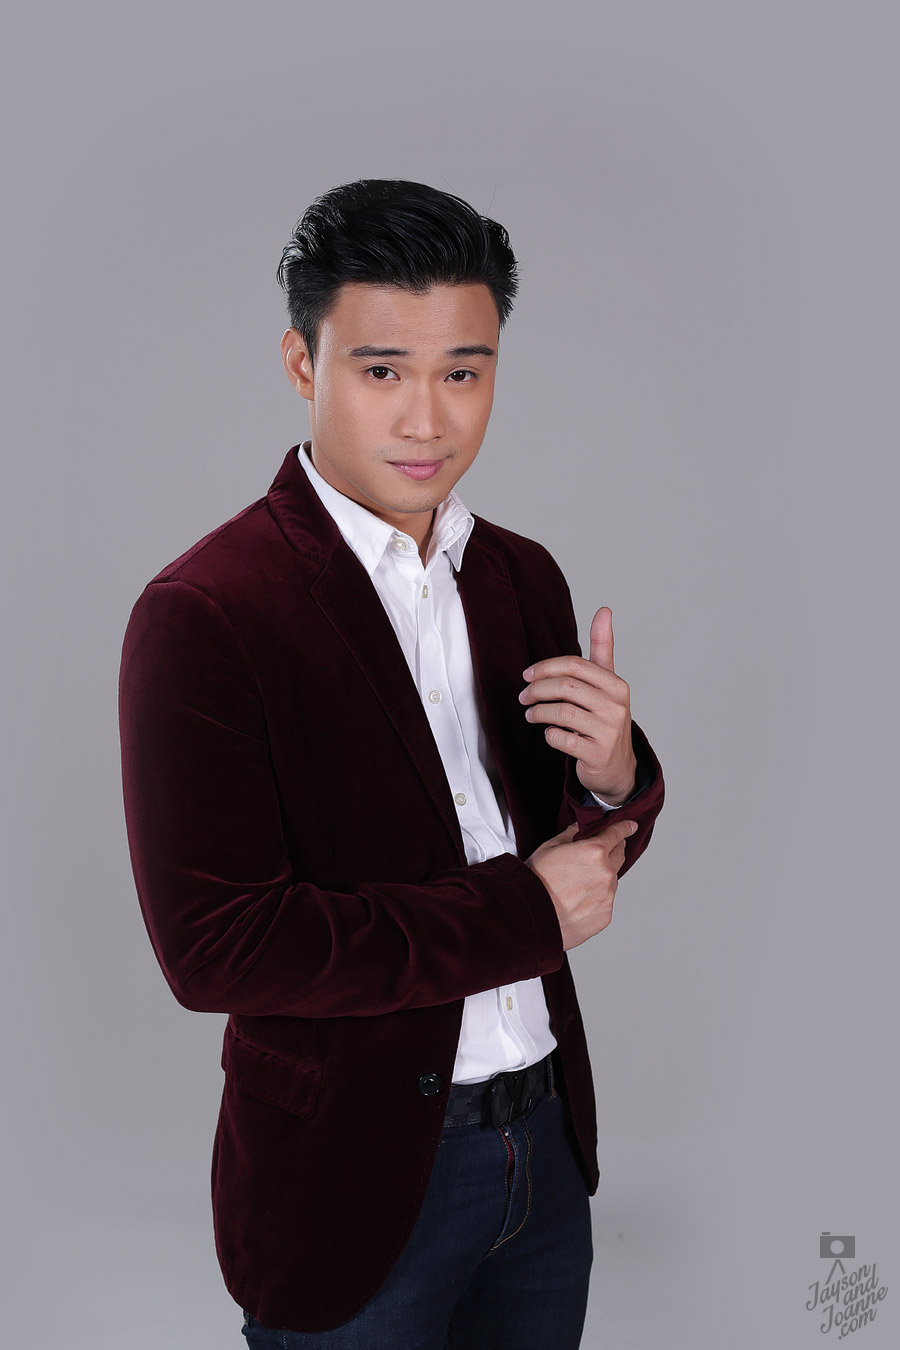 Edgar Allan Guzman for Your Face Sounds Familiar ABS-CBN - Photography by Jayson and Joanne Arquiza